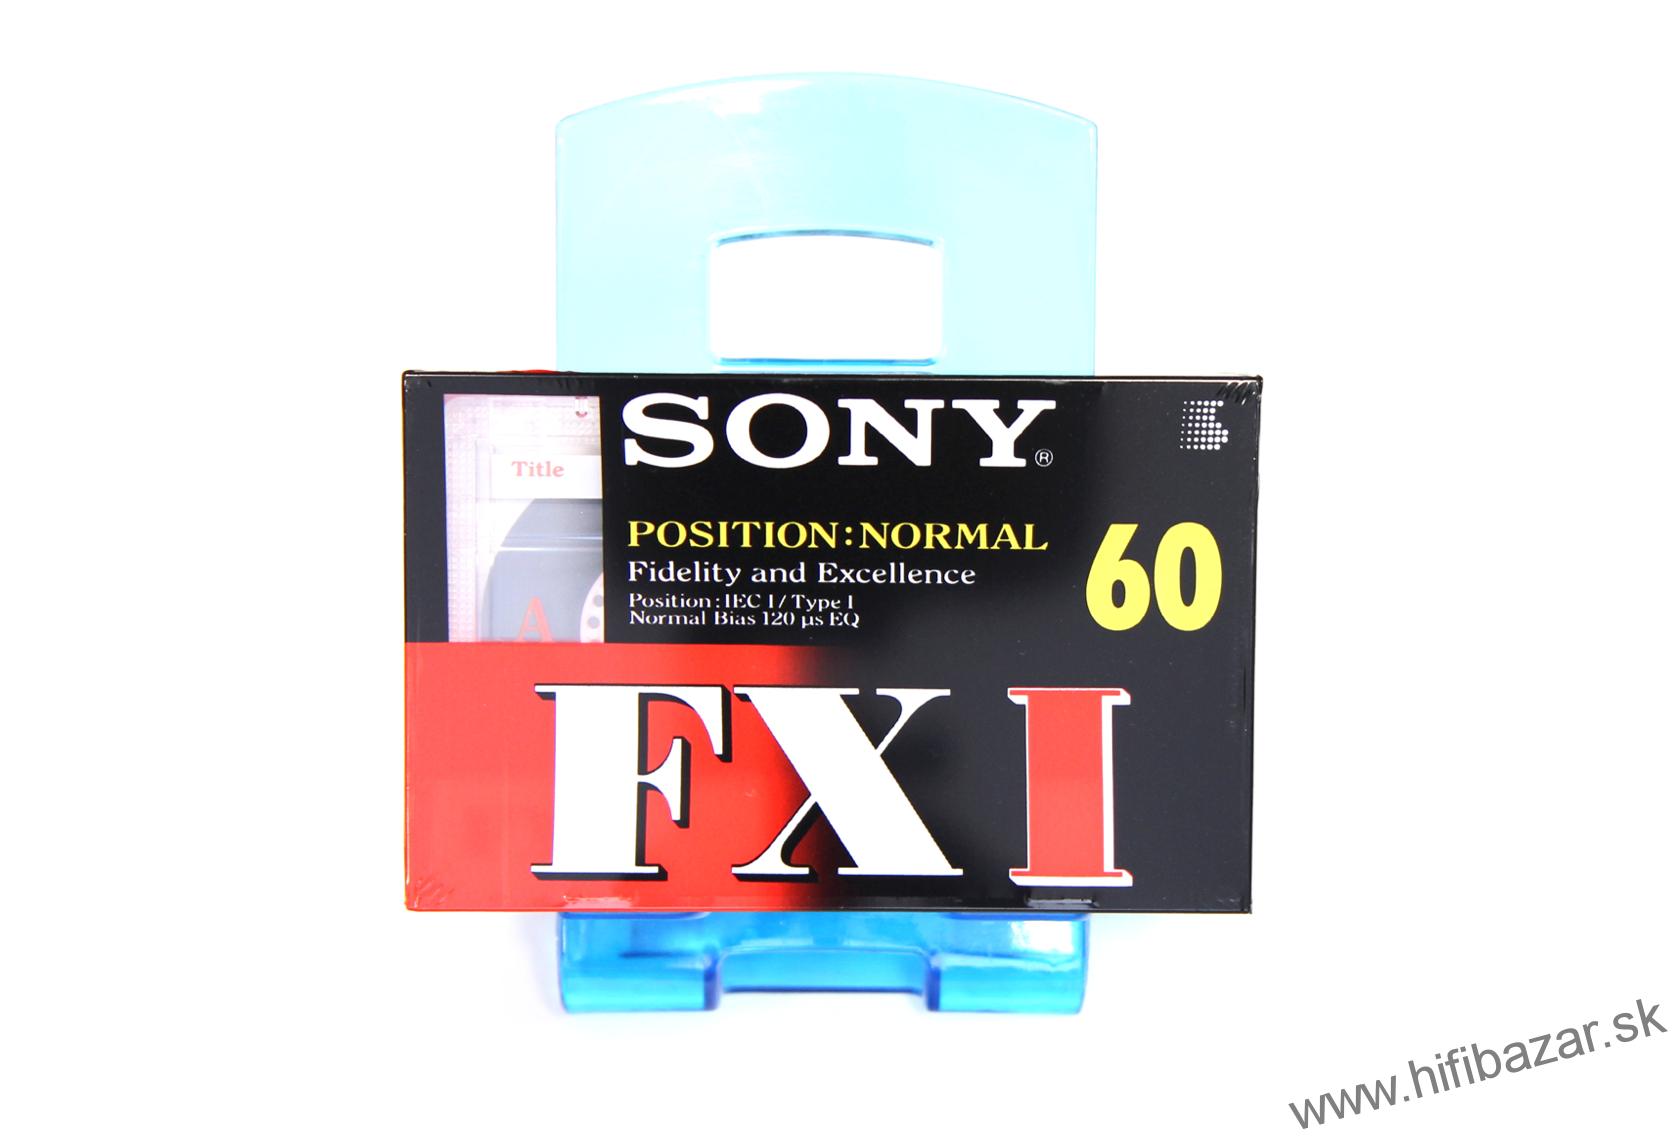 SONY FXI-60 Position Normal